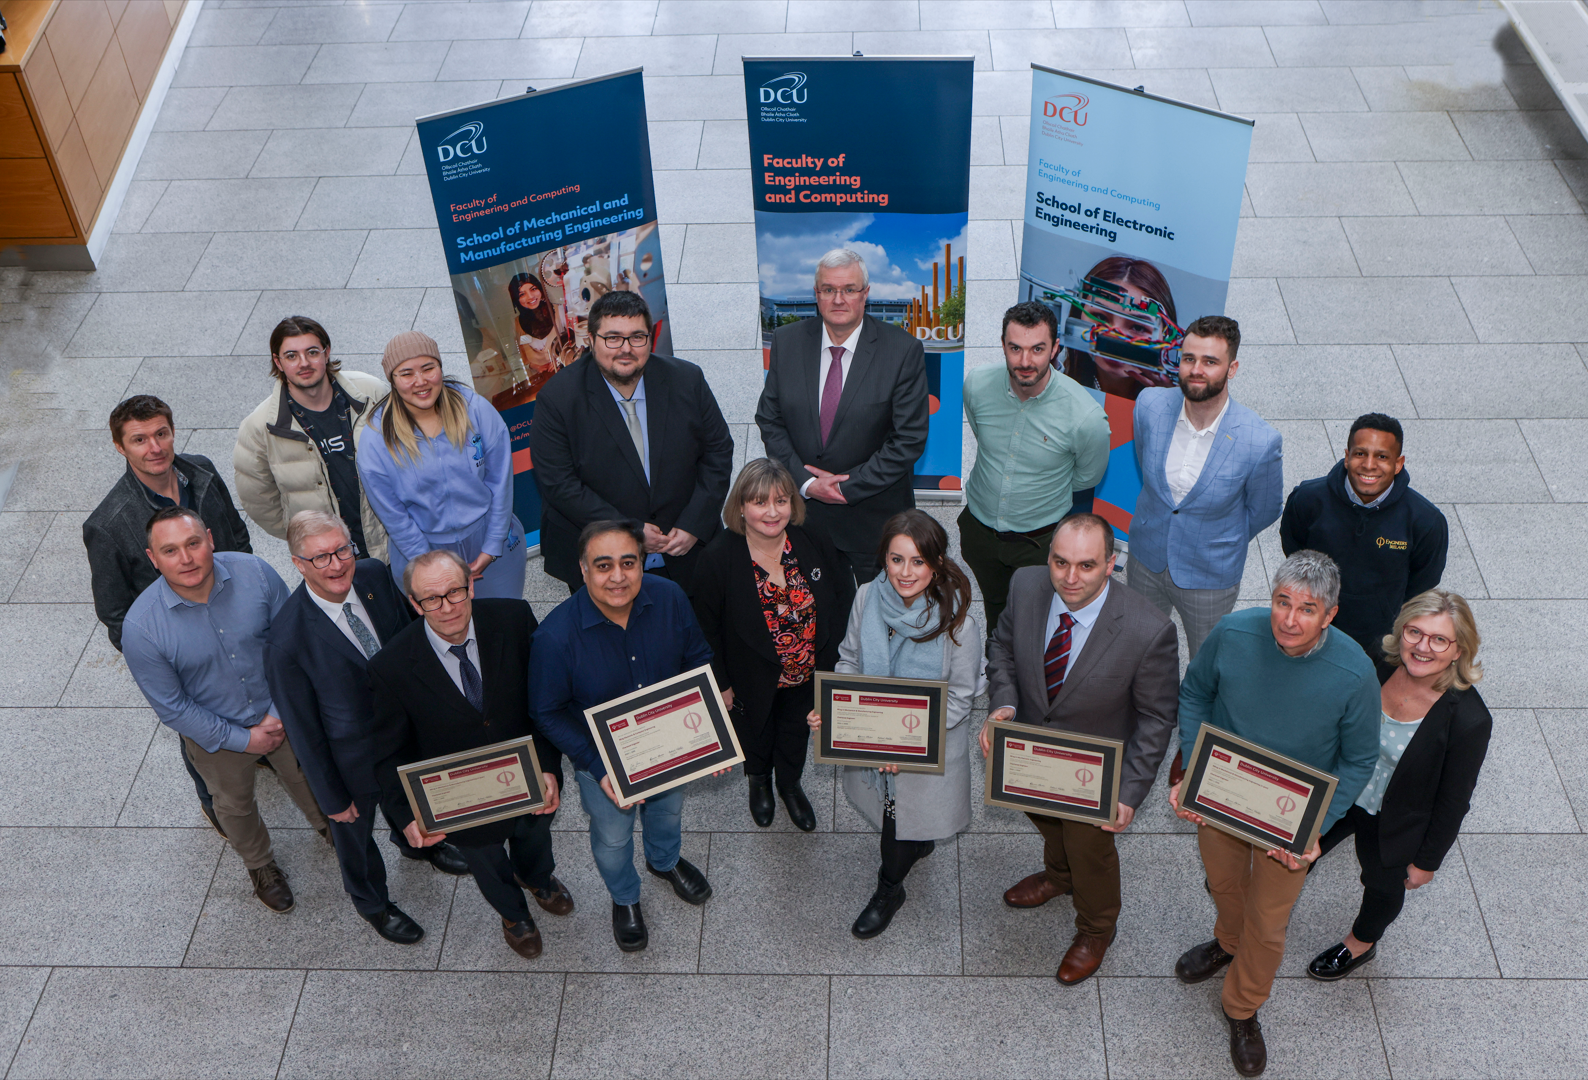 Shows Engineers Ireland and DCU Course Chairs with Accreditation posters